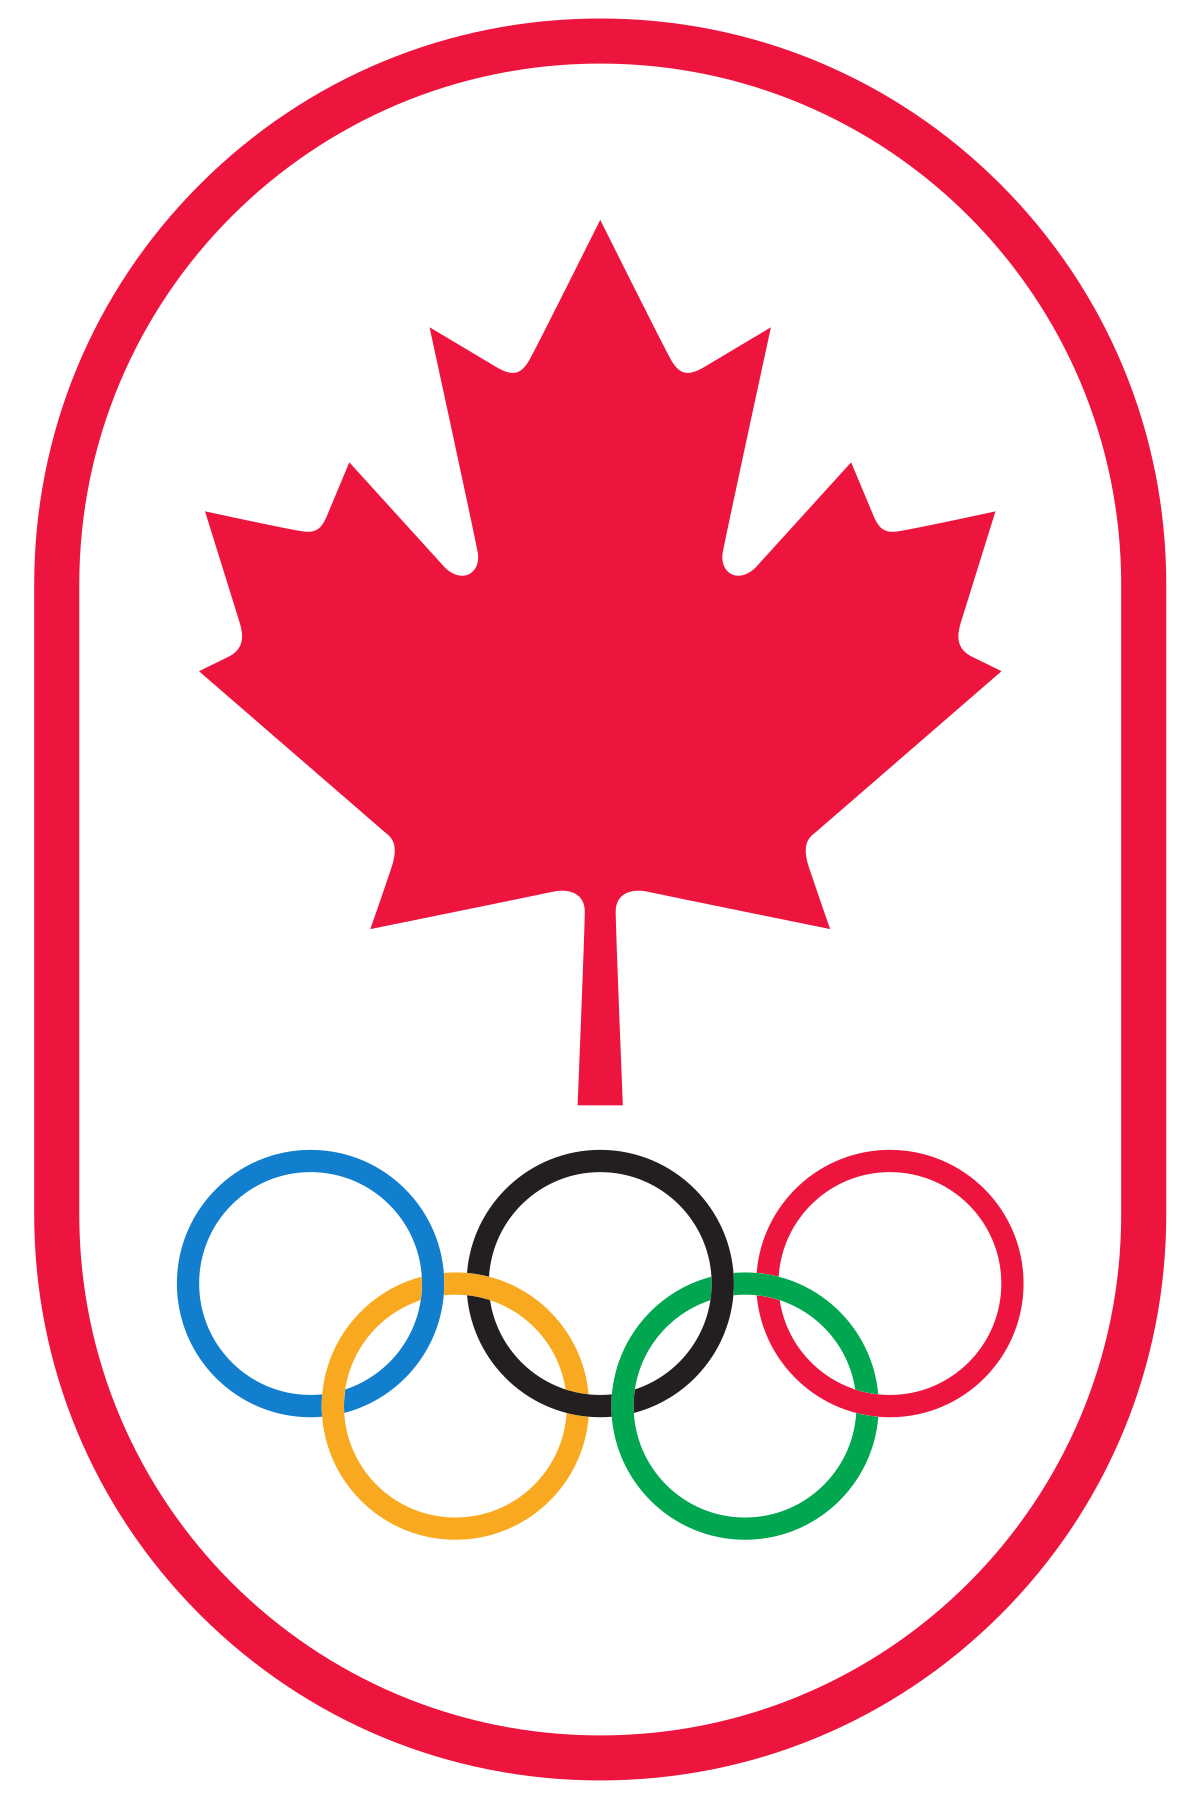 https://ppforum.ca/wp-content/uploads/2023/04/1200px-Canadian_Olympic_Committee_logo.svg_.png